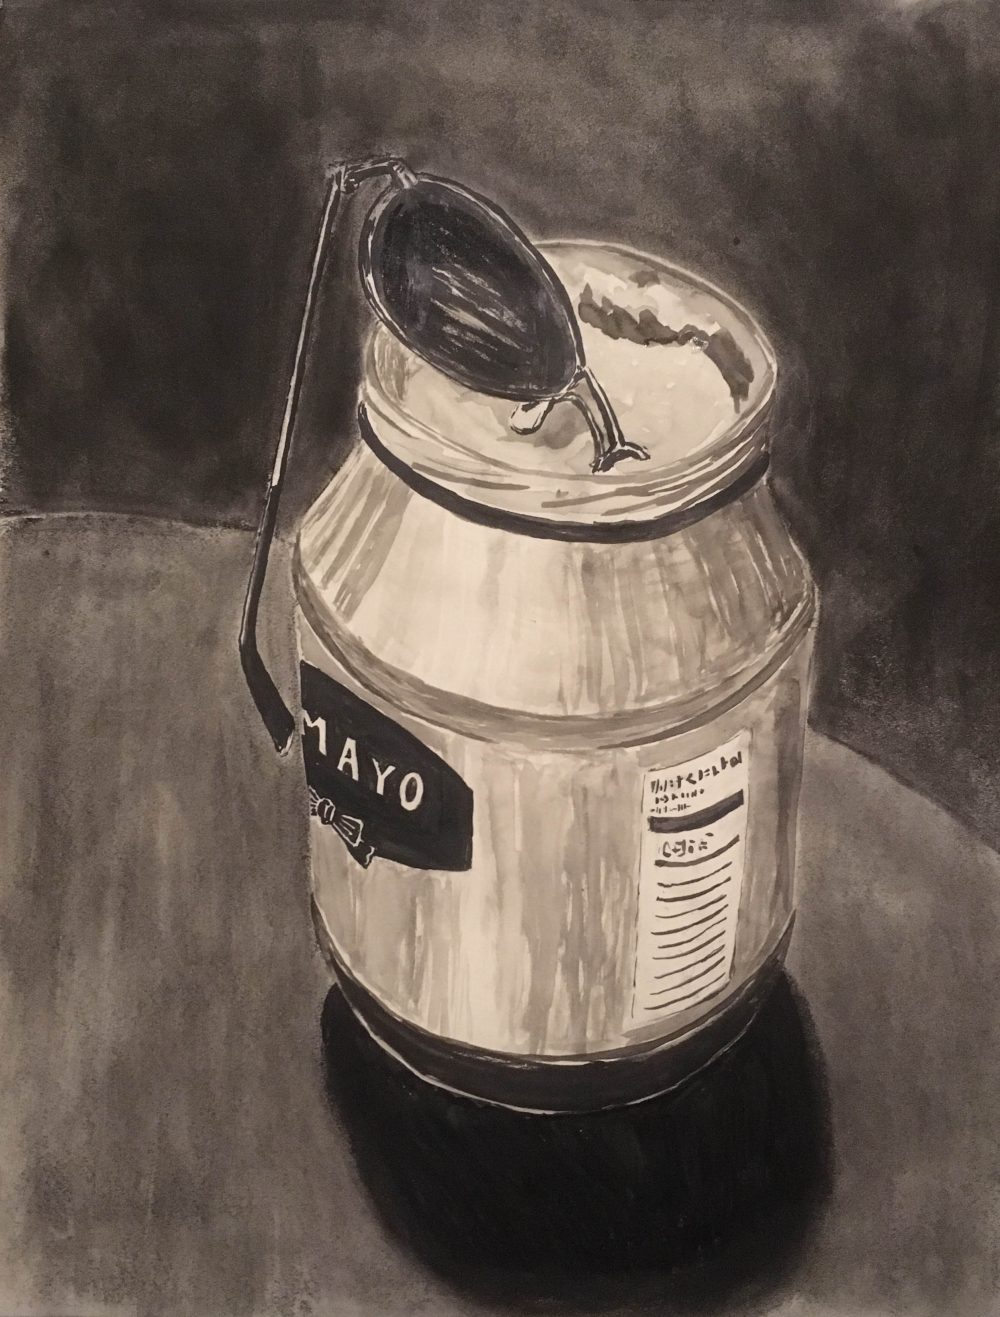 A stark, grayscale drawing depicting a full jar of mayonnaise on a tabletop, with its lid off, and a pair of aviator sunglasses half-dipped into the jar.